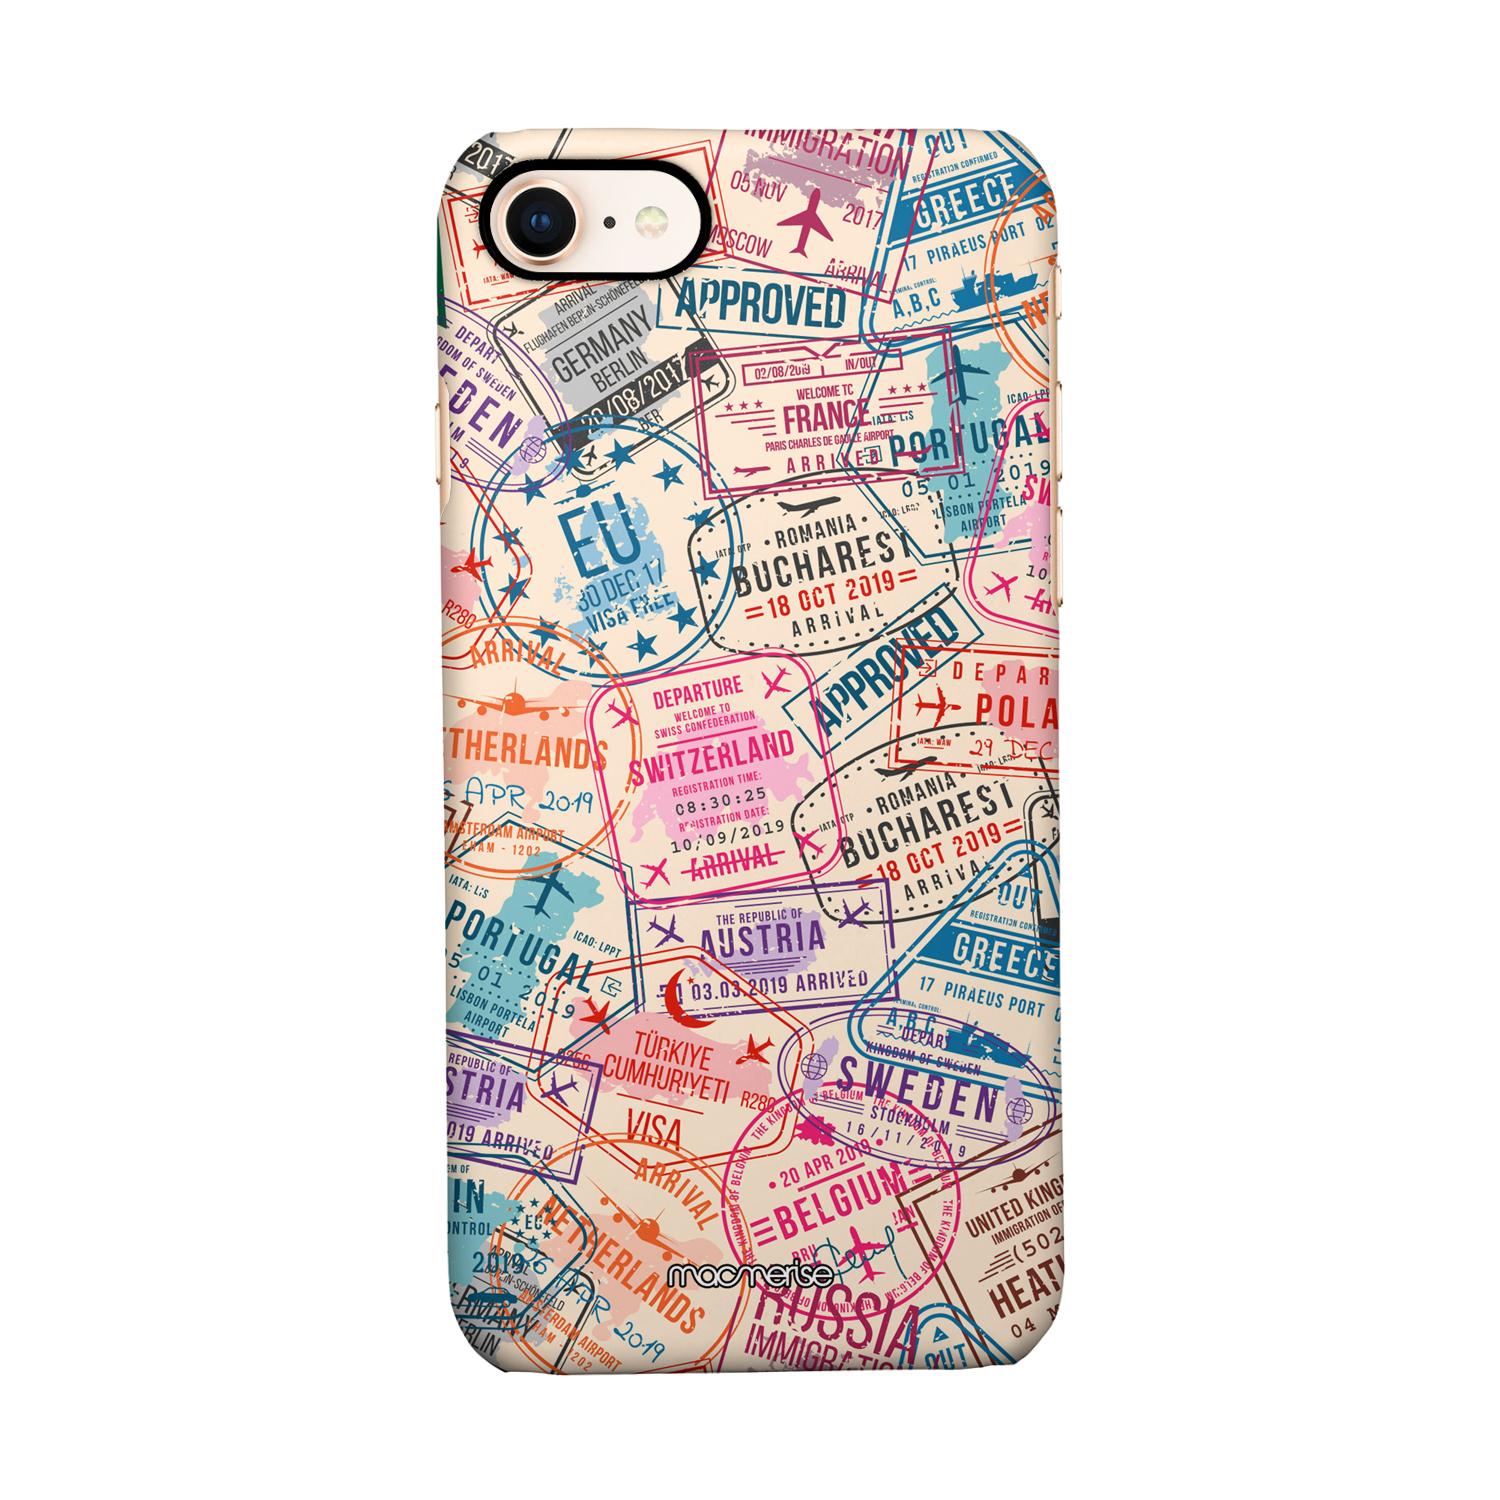 Immigration Stamps Beige - Sleek Phone Case for iPhone 7